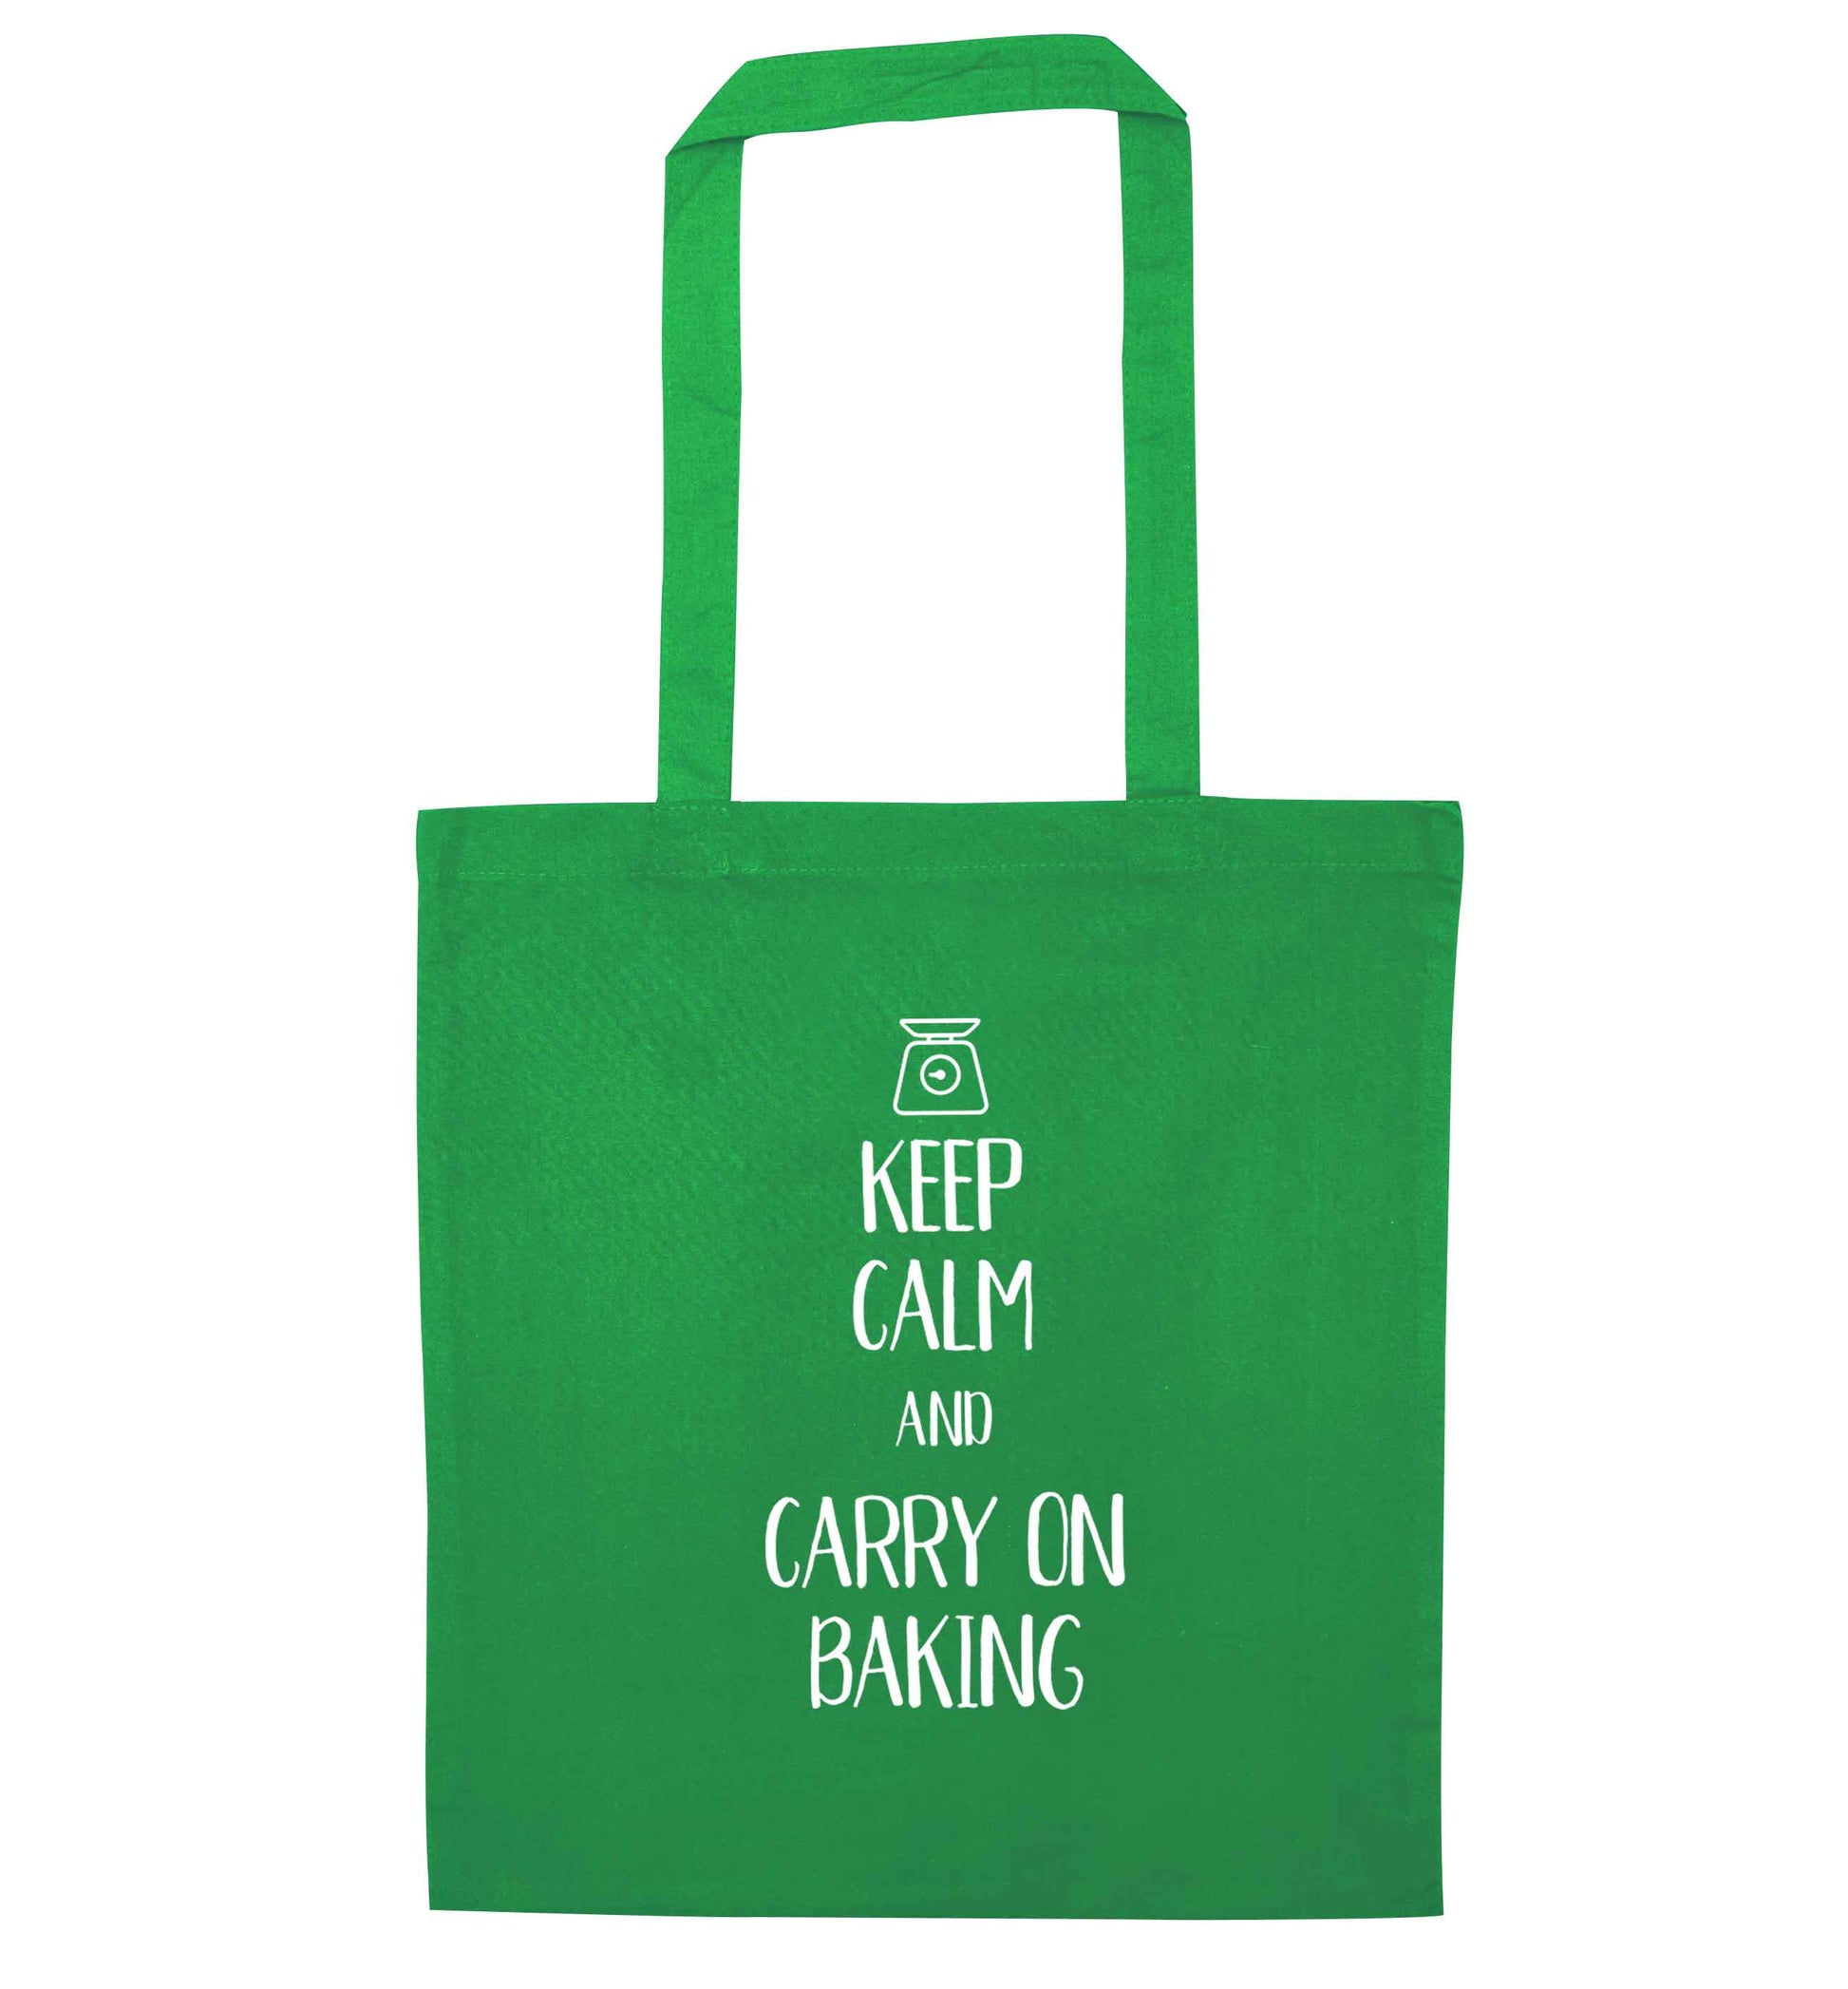 Keep calm and carry on baking green tote bag